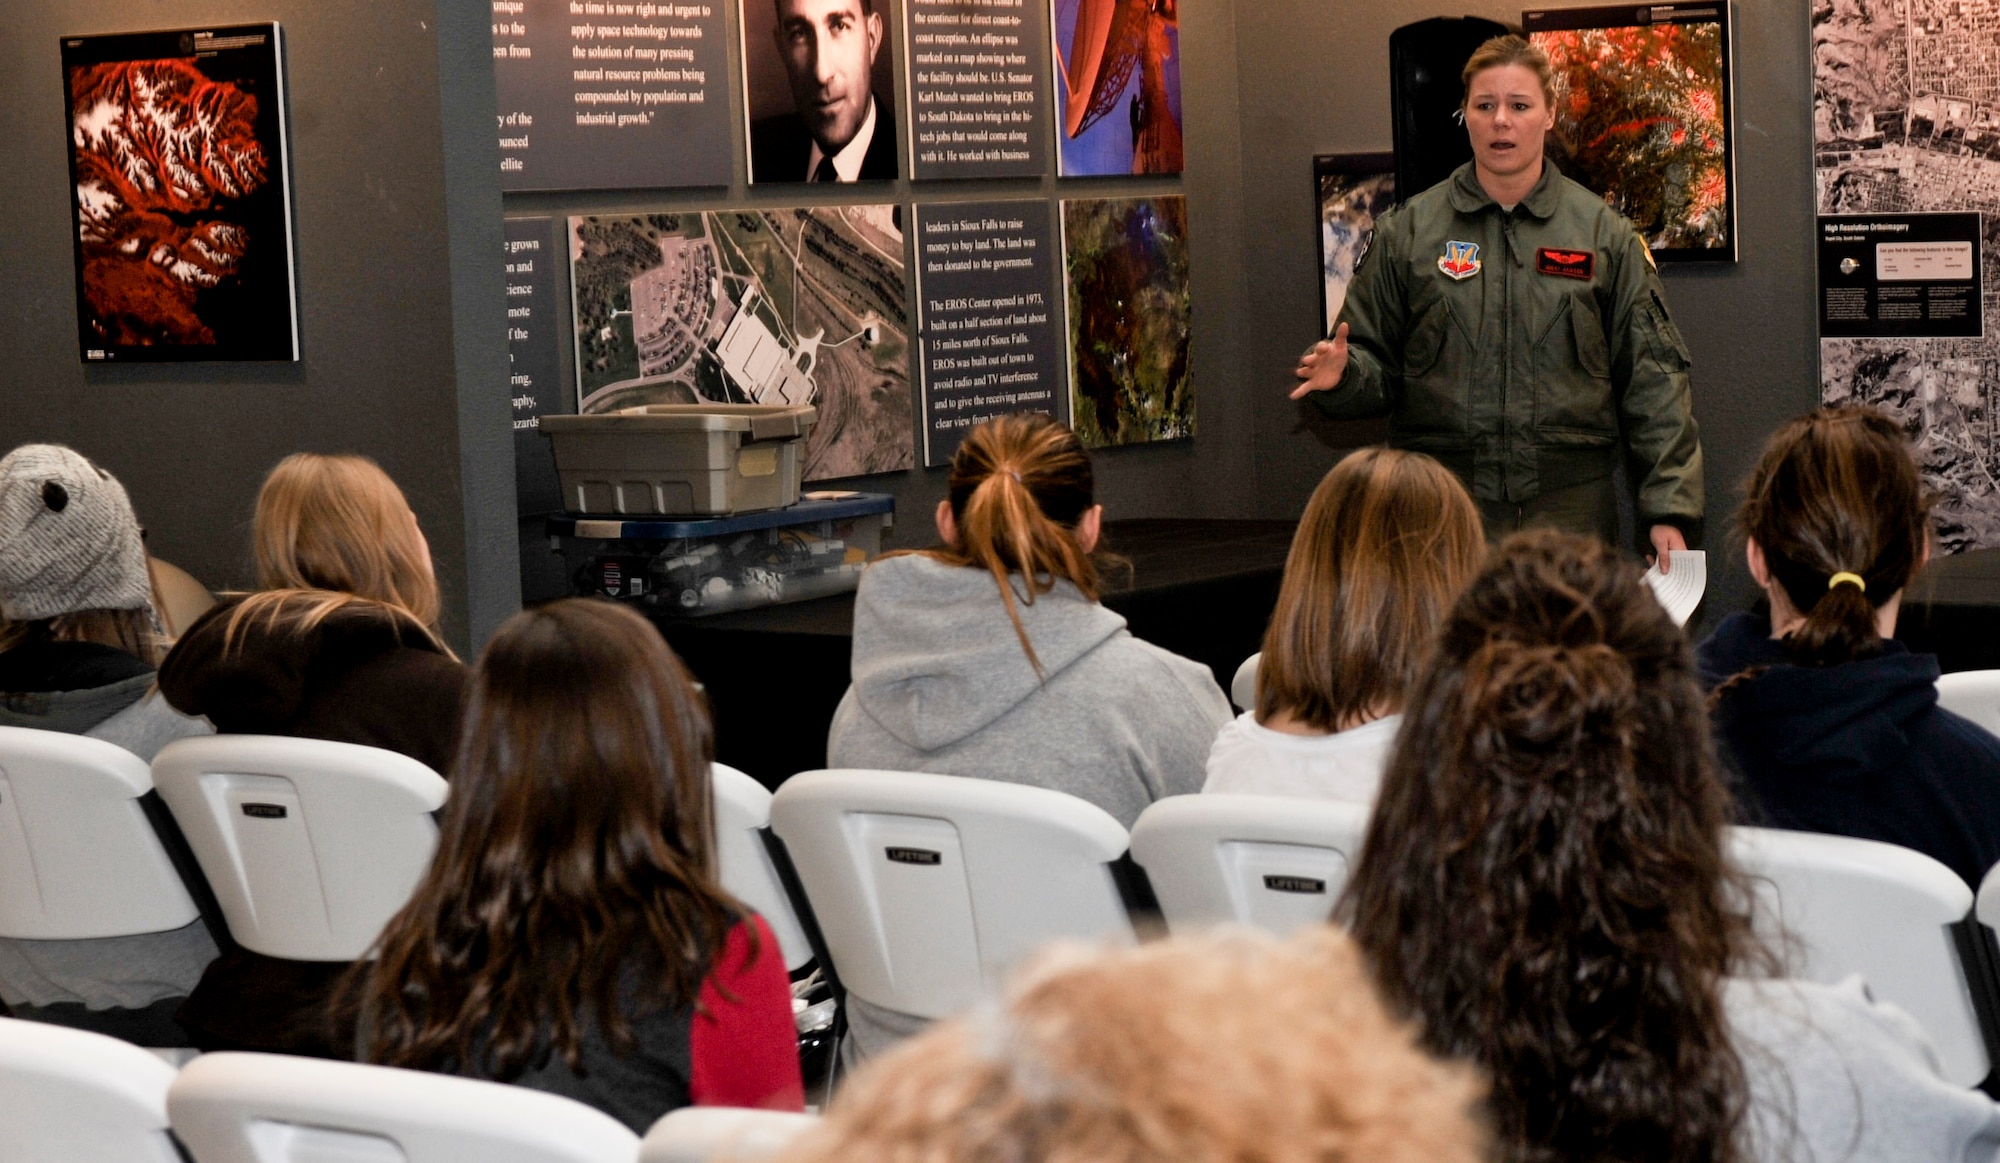 Capt. Nicole Jansen, 34th Bomb Squadron B-1 pilot, speaks about her career during the Women of Aviation event at the South Dakota Air and Space Museum in Box Elder, S.D., March 9, 2013. Jansen recounted her aspirations to become a pilot, and how a book about the U.S. Air Force Academy given to her by a ninth-grade teacher fueled her desire to attend to the academy and become an Air Force pilot. (U.S. Air Force photo by Airman 1st Class Anania Tekurio/Released)  